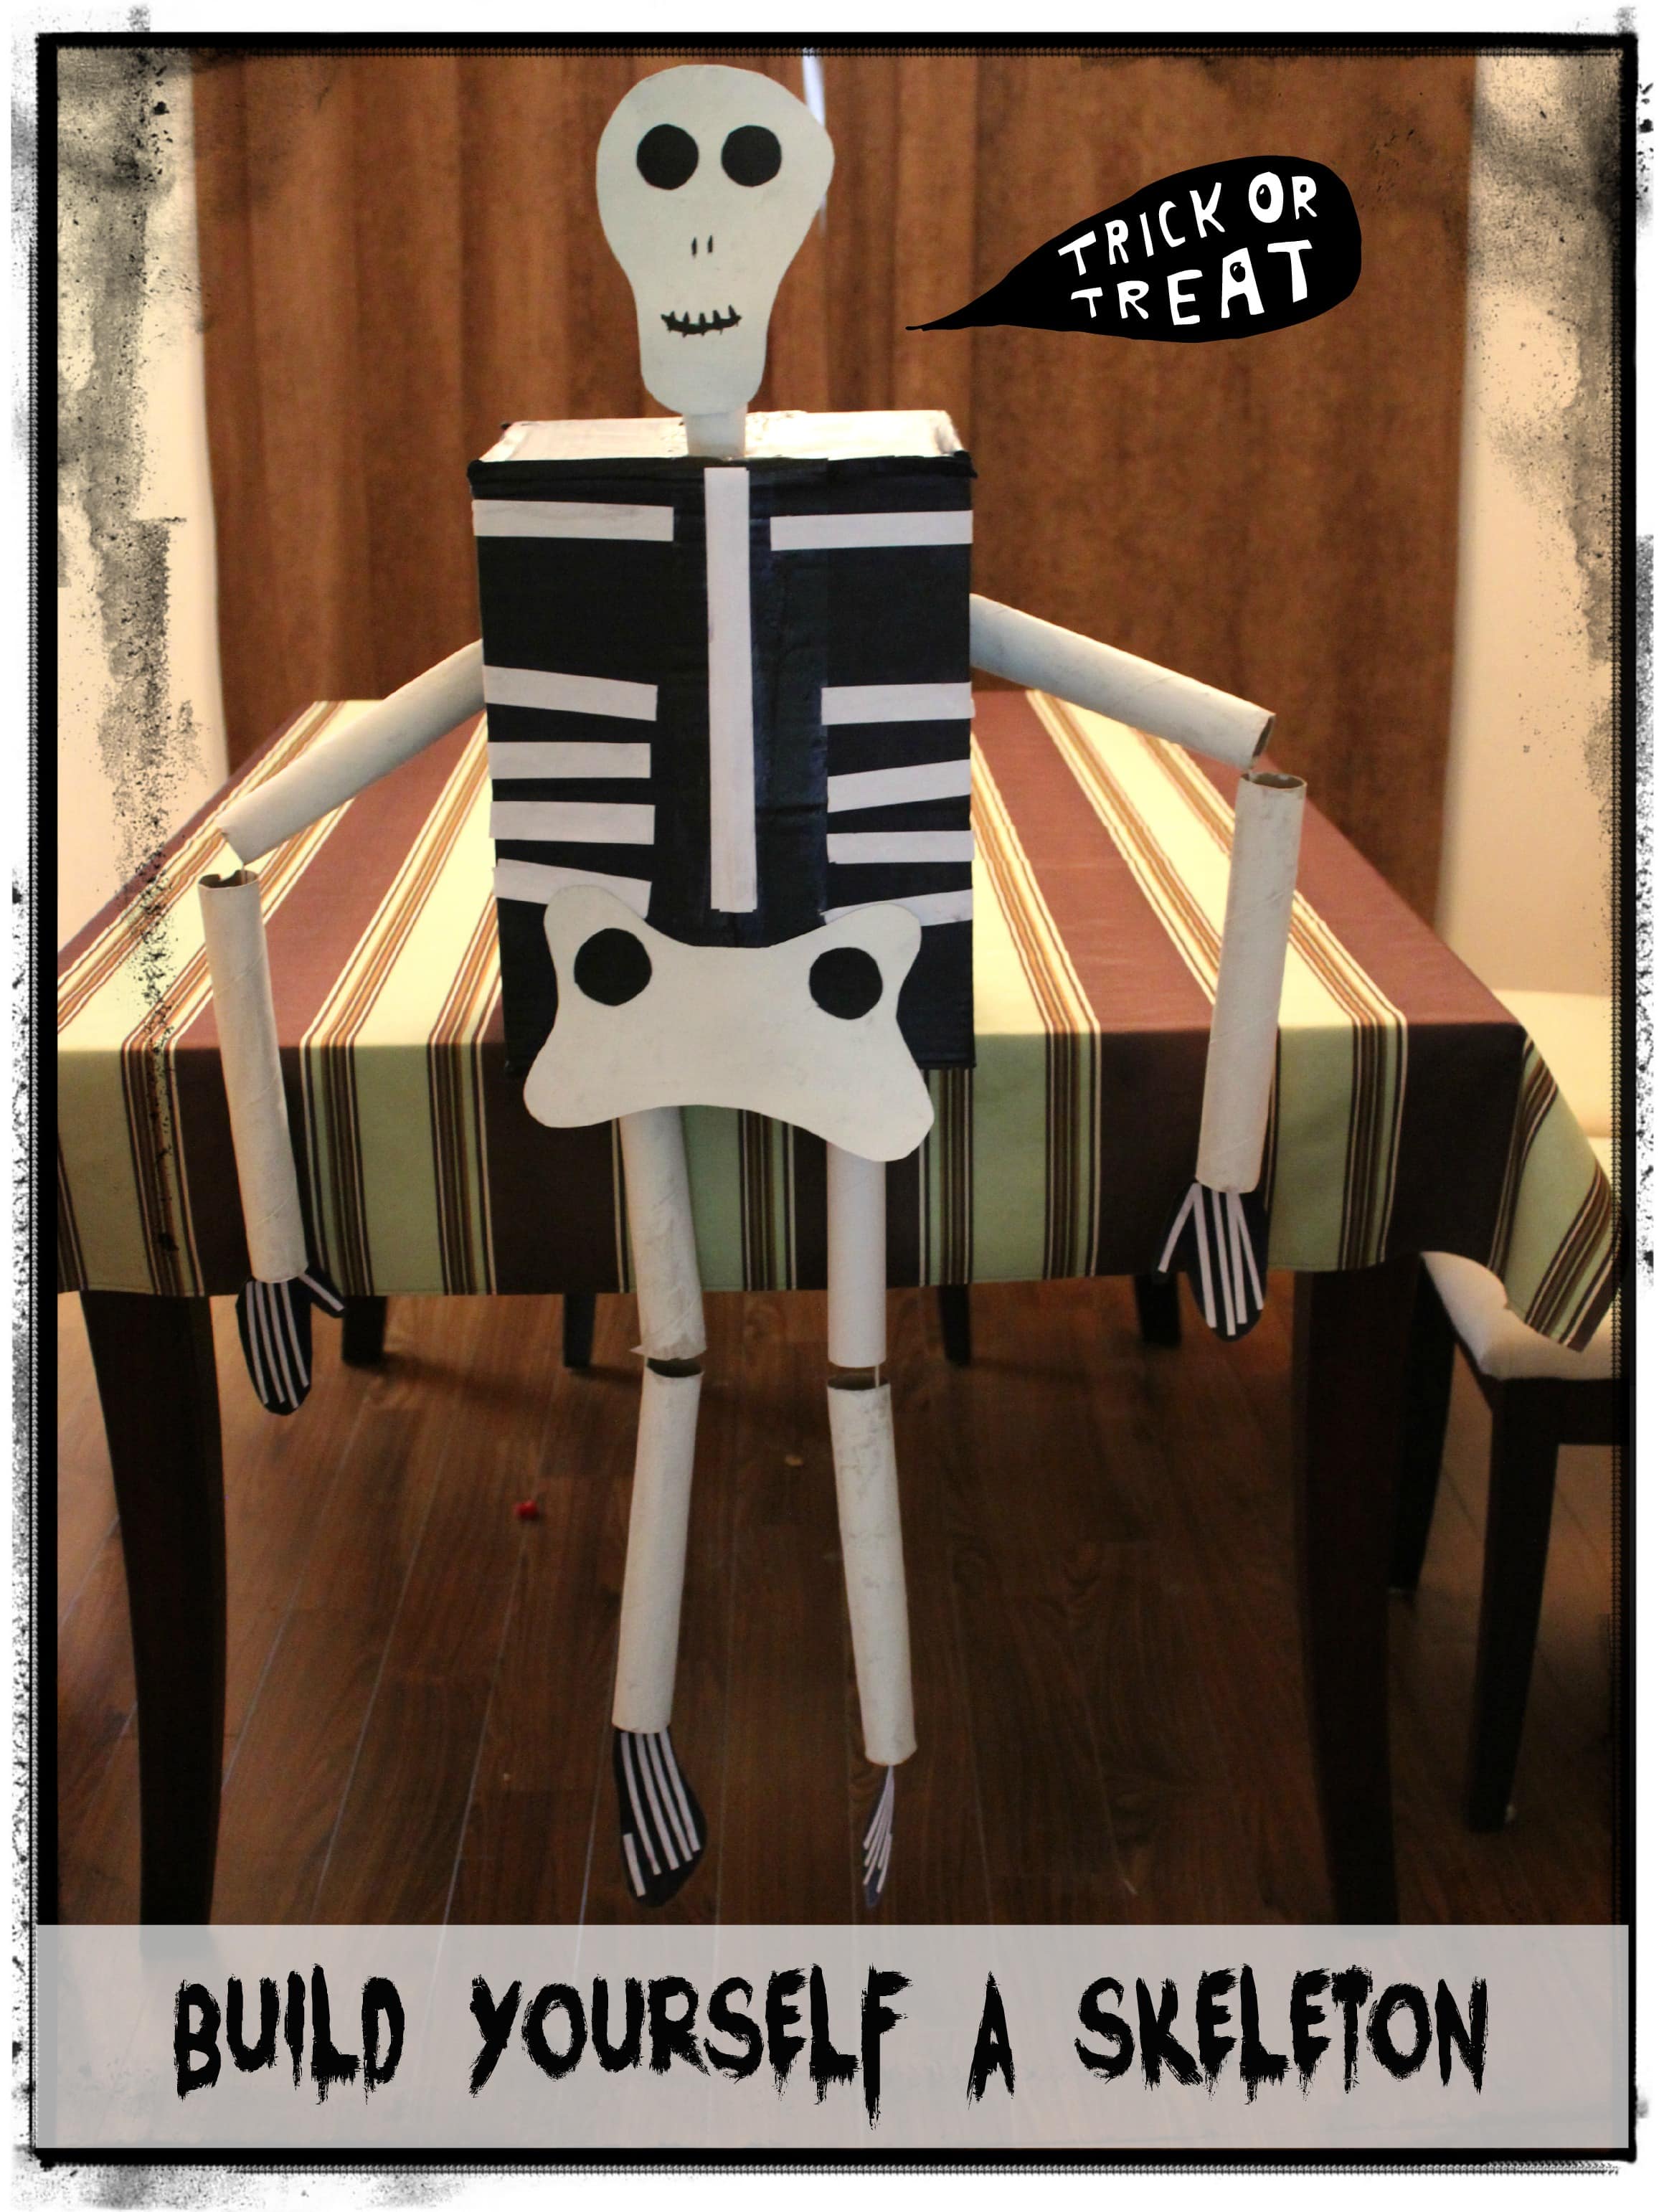 Spook Up Your Halloween with Skeleton Crafts